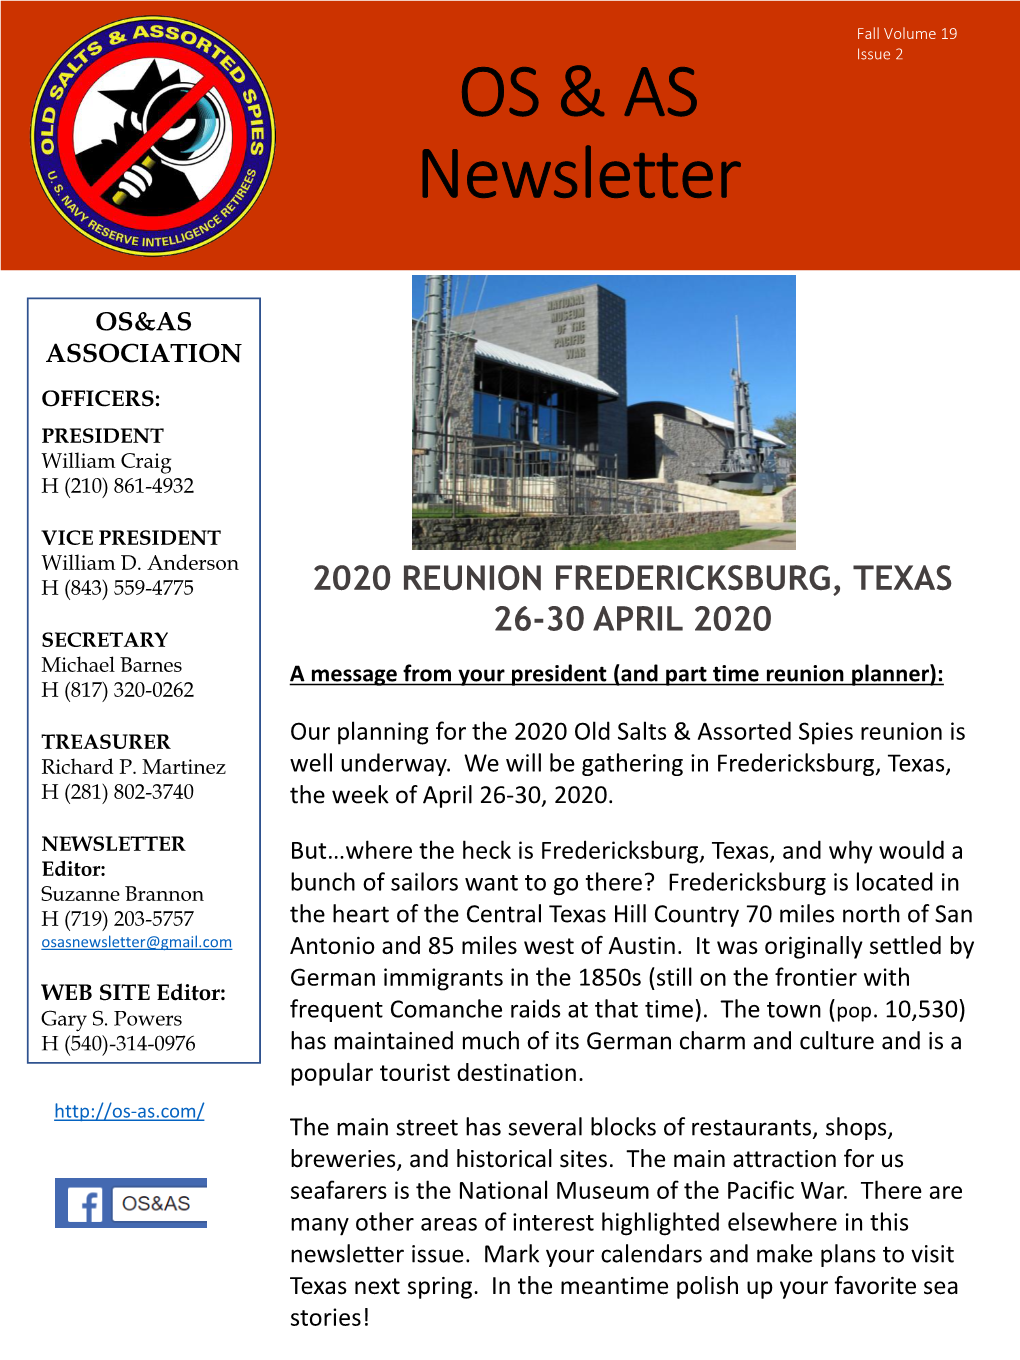 OS & AS Newsletter